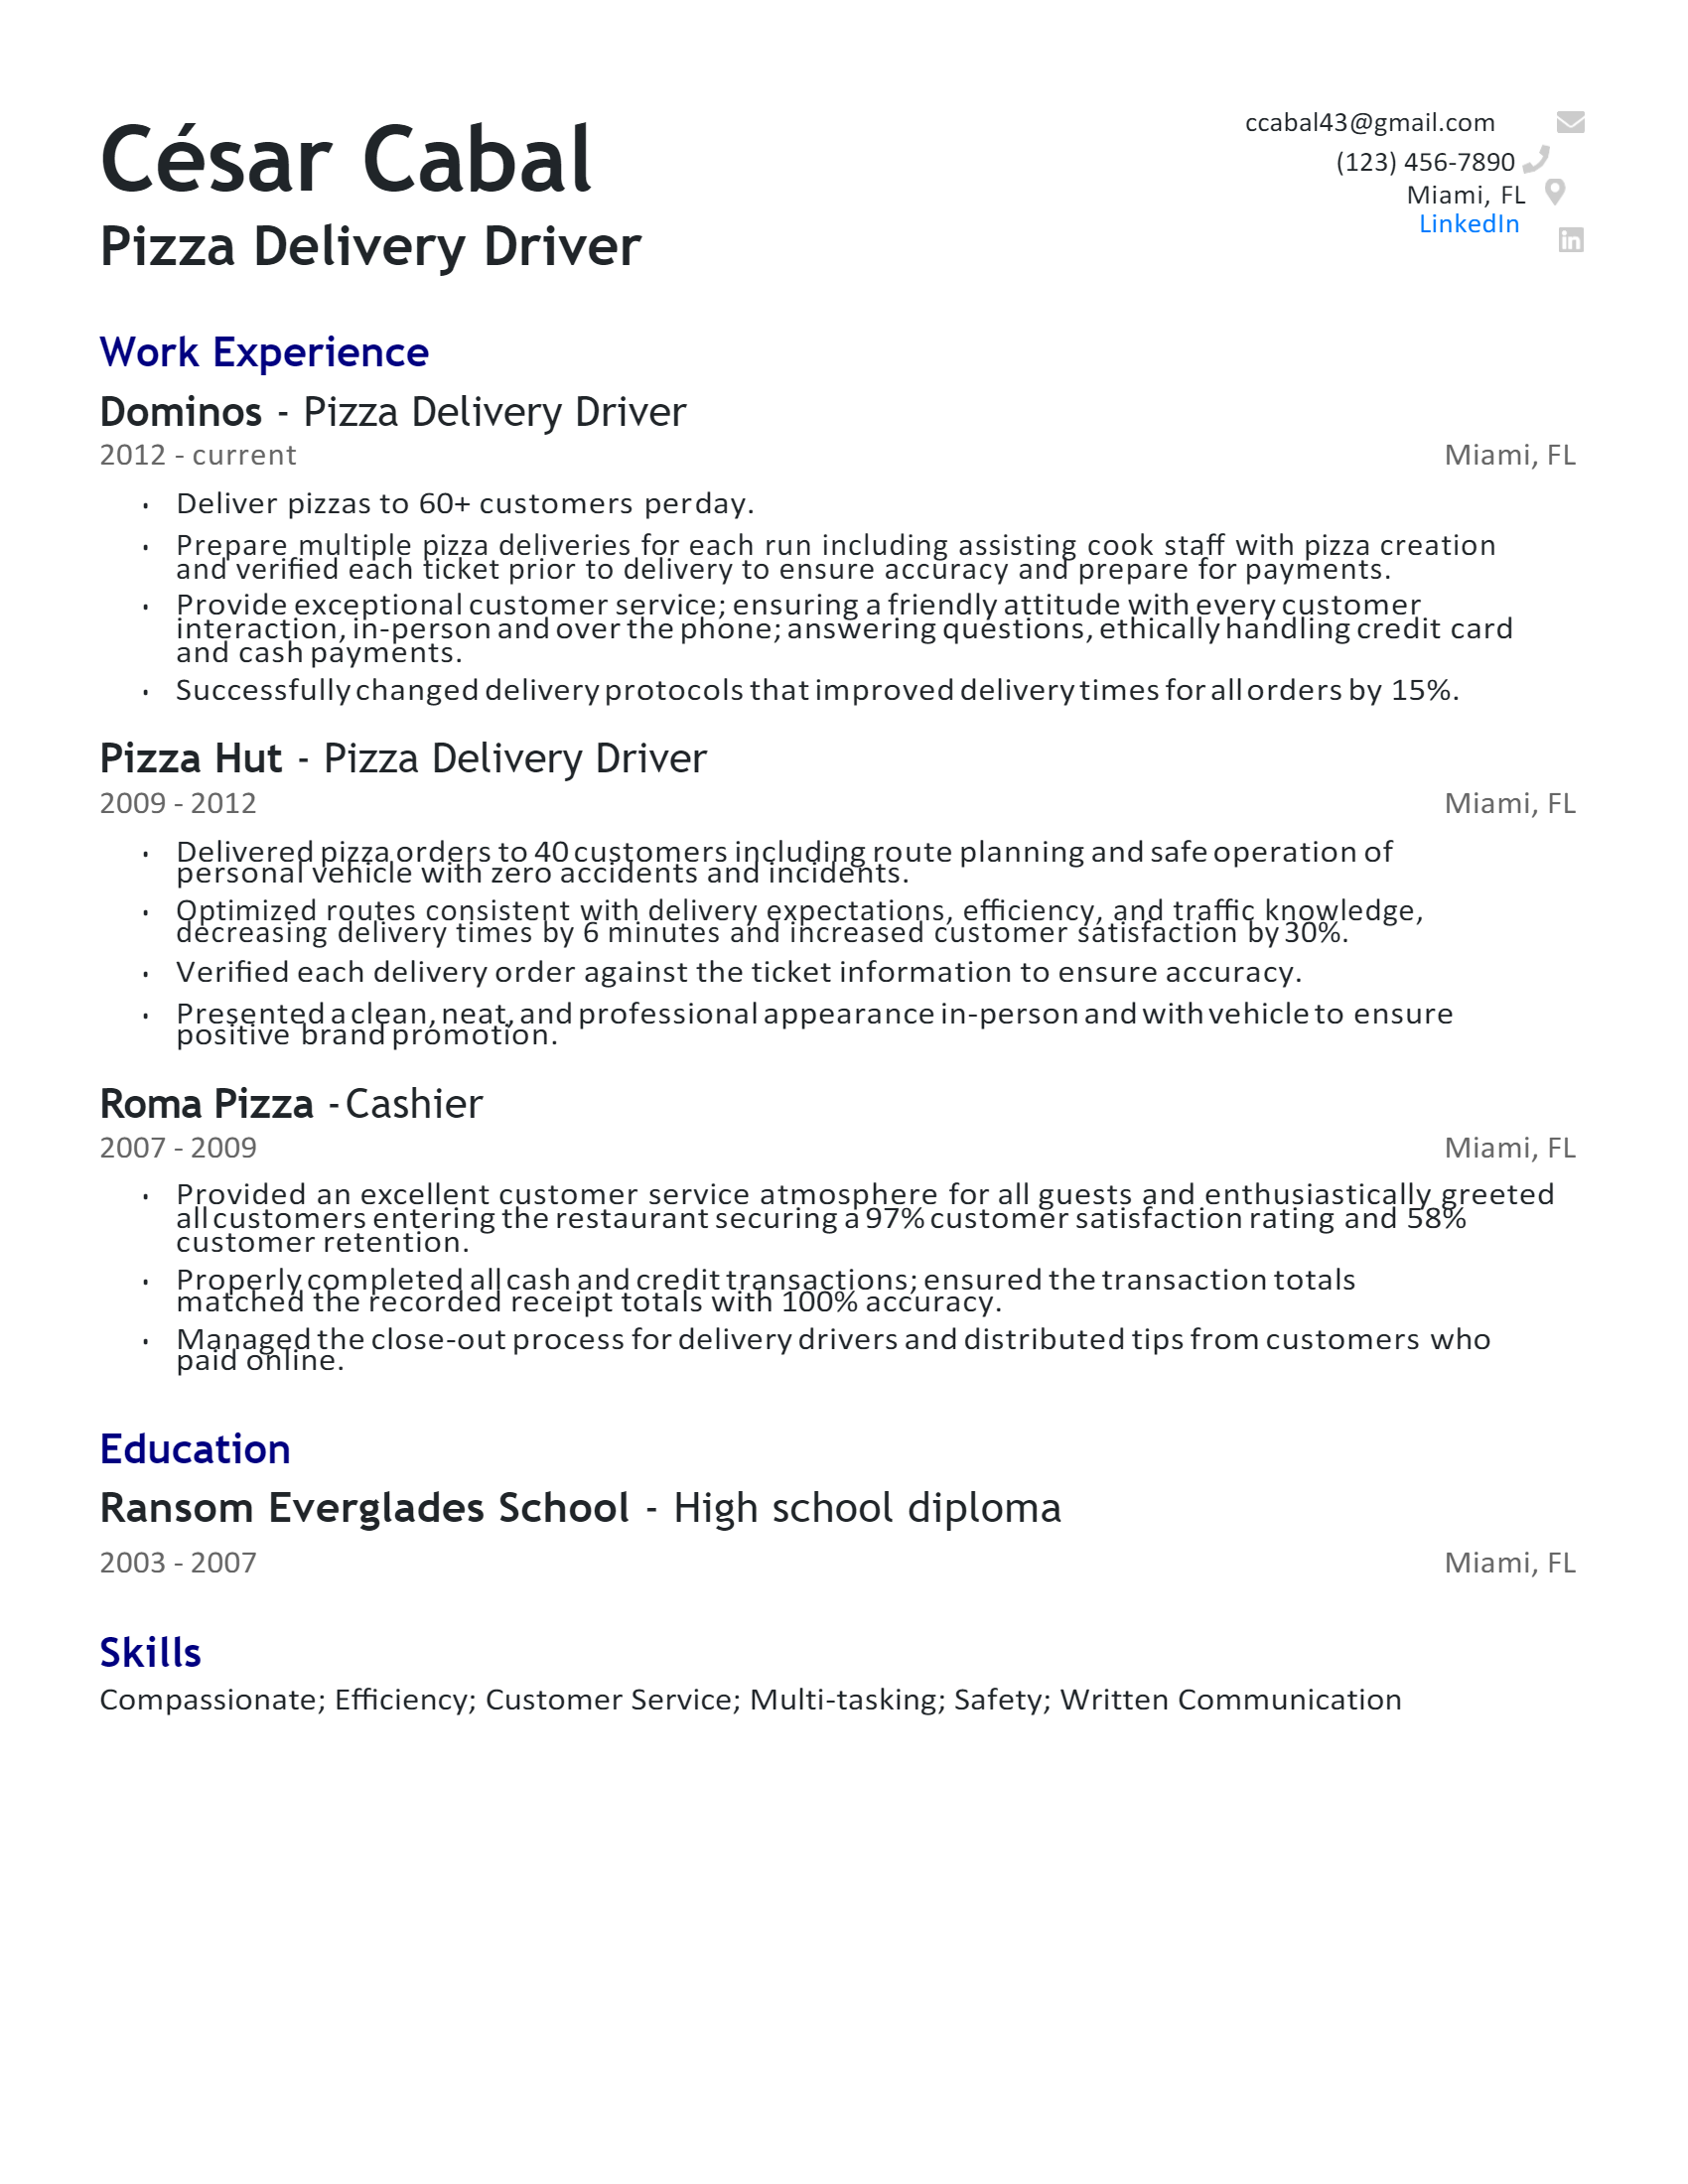 Pizza Delivery Driver Resume .Docx (Word)